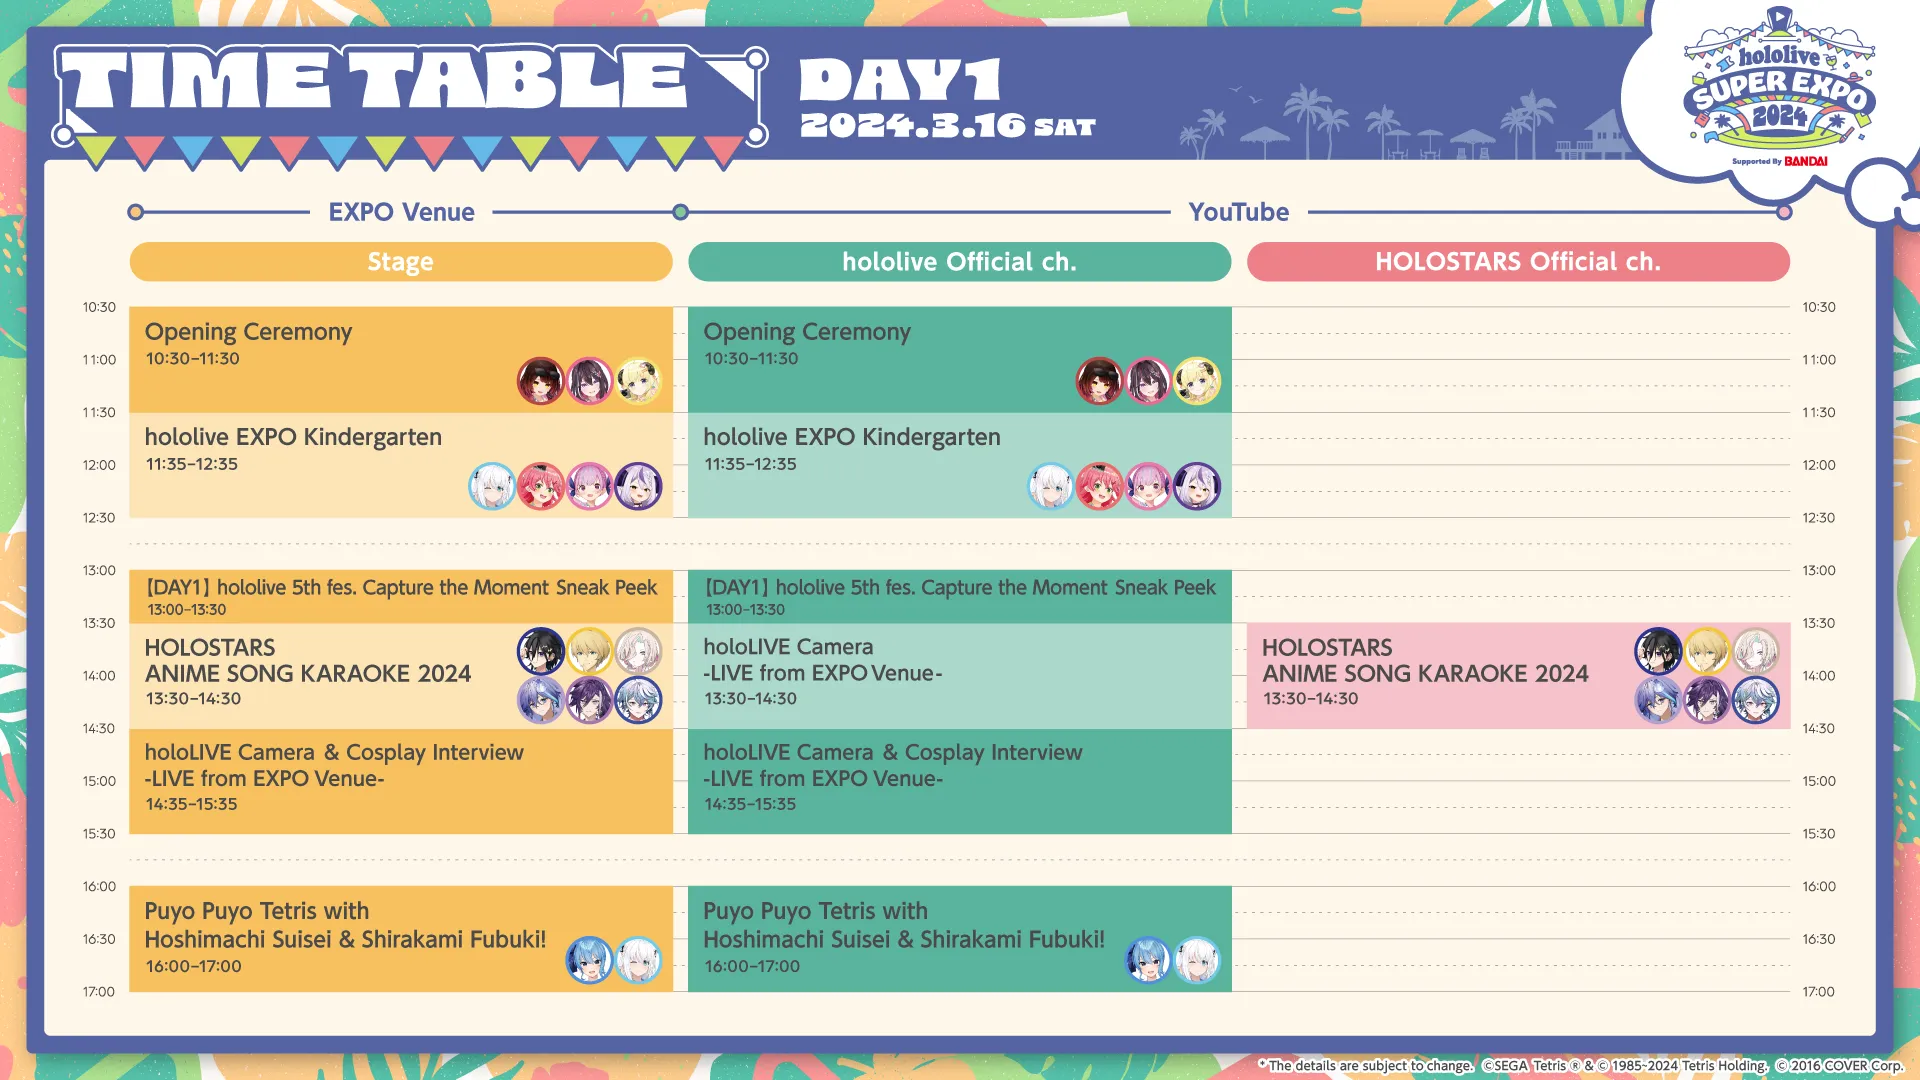 EXPO Stage Time Table DAY1